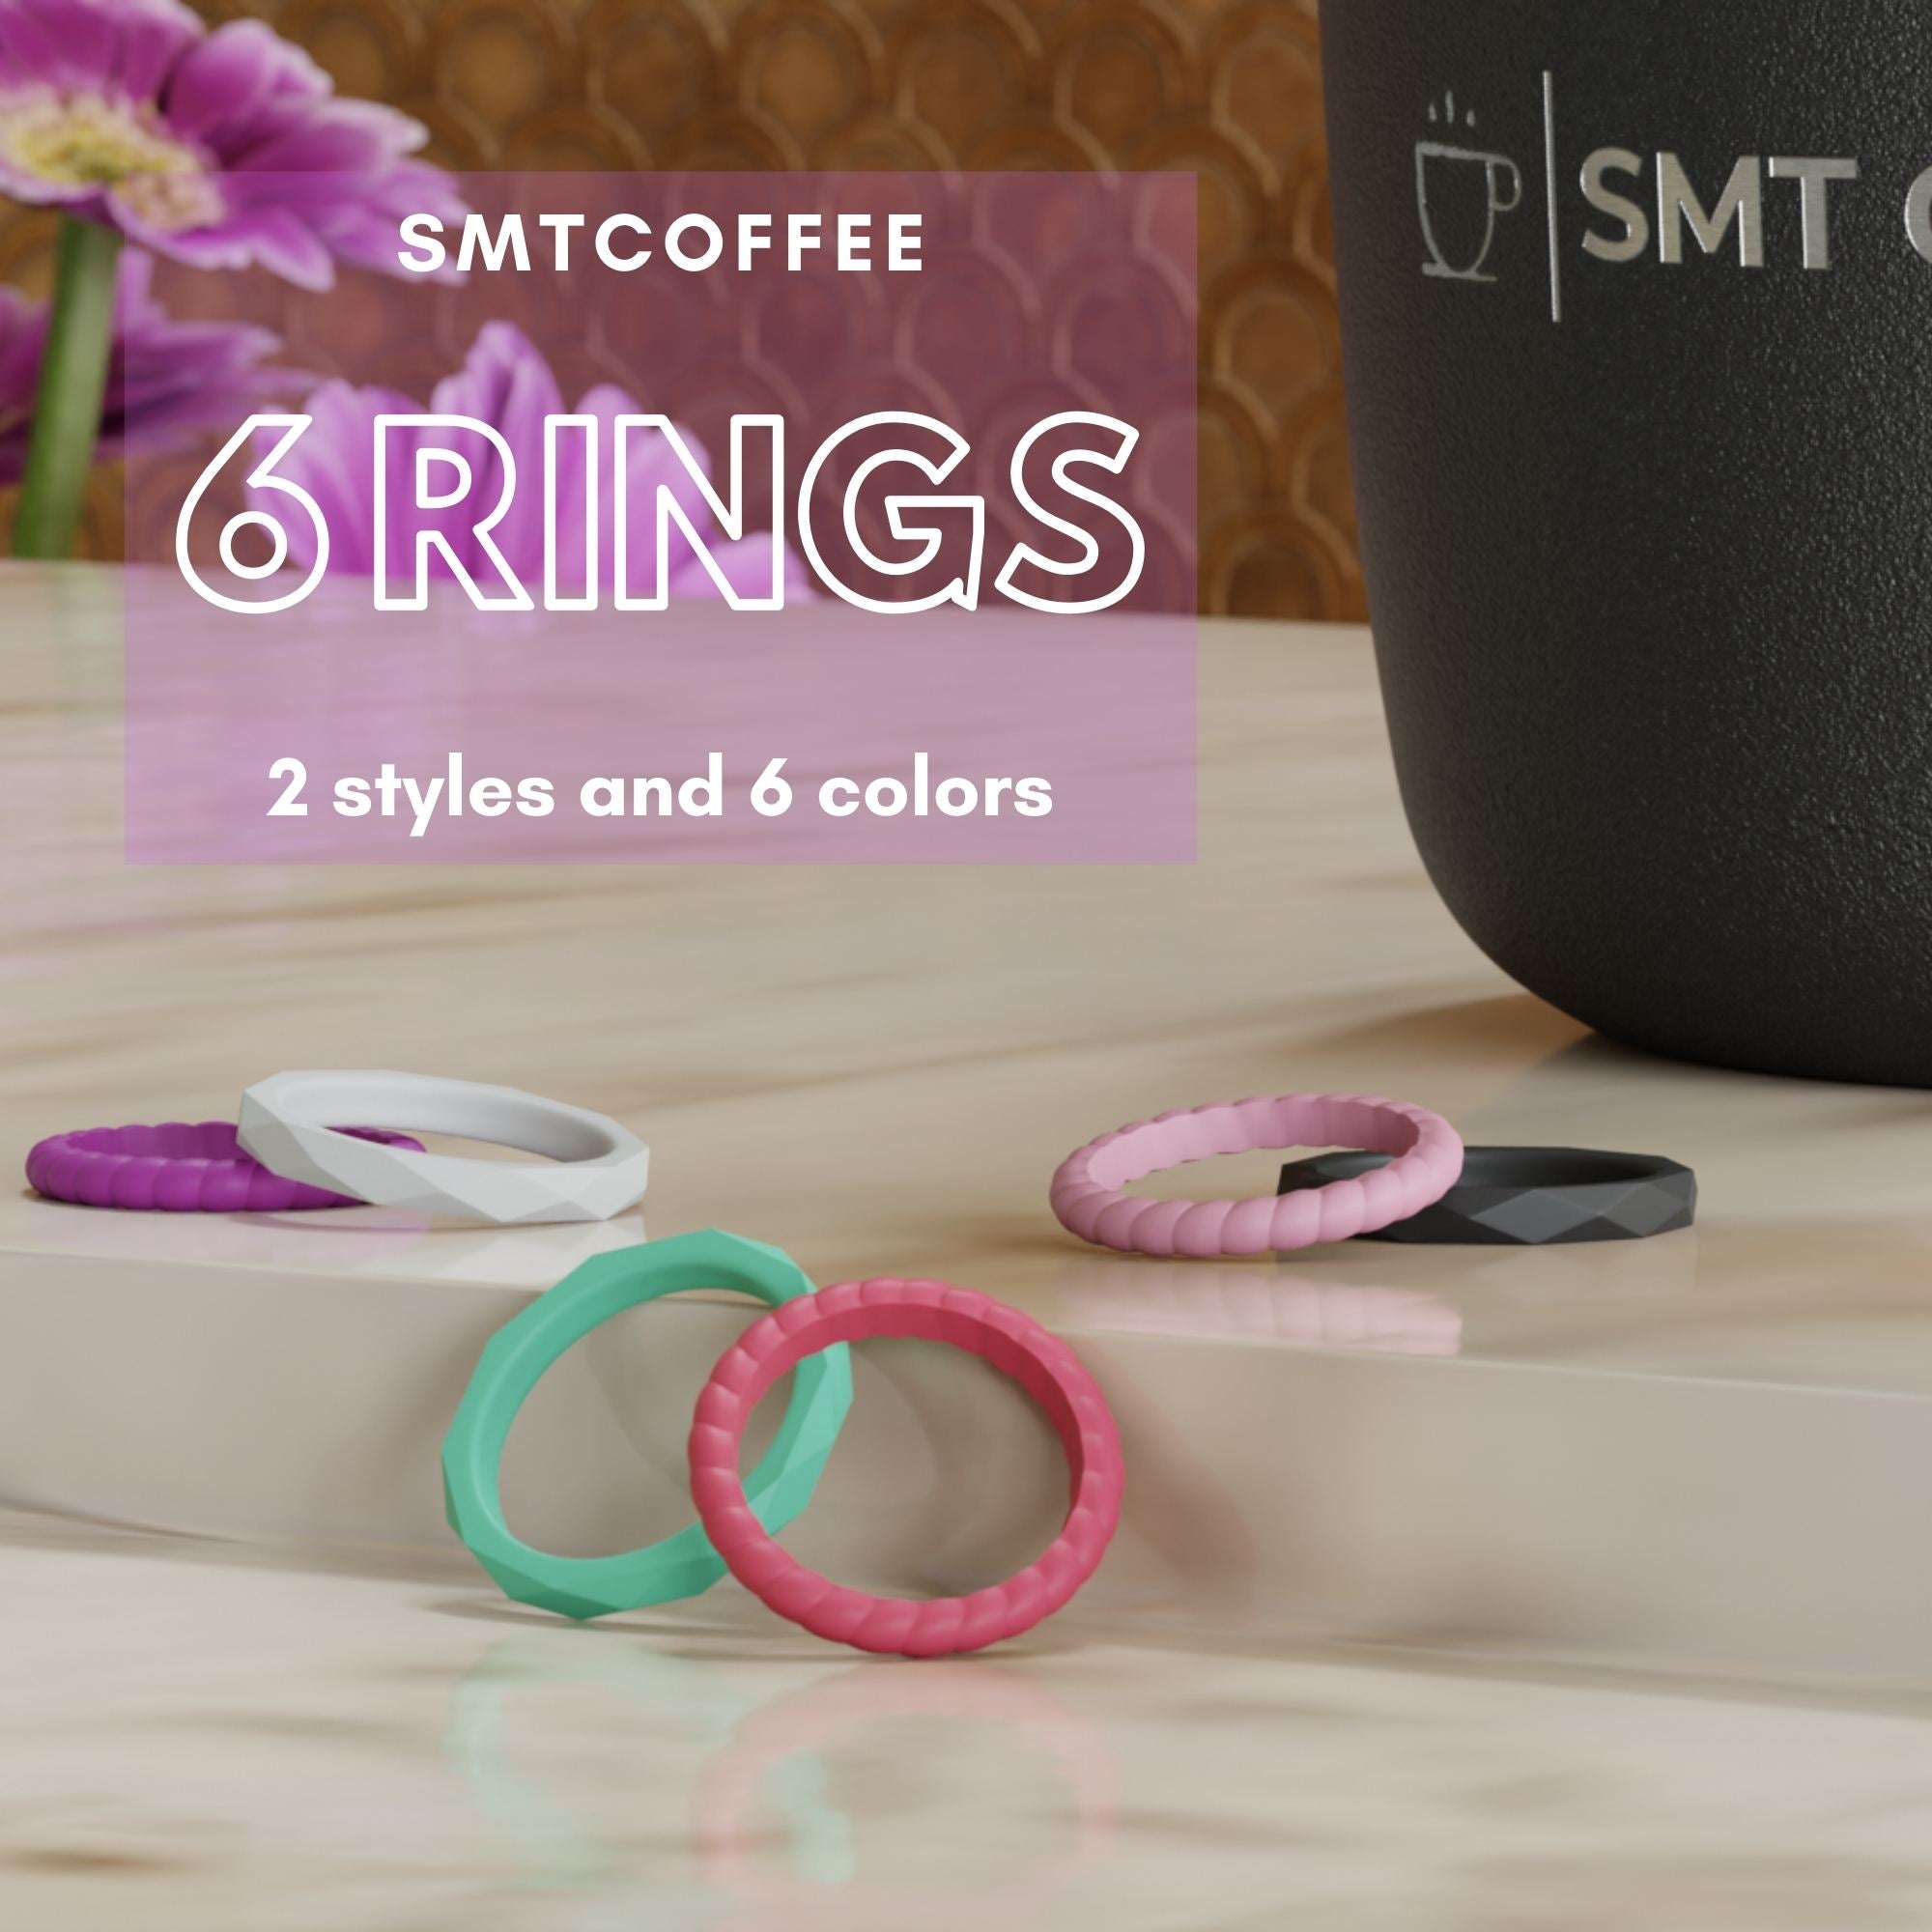 stackable silicone wedding rings for women. comes with 6 colors 2 styles smtcoffee